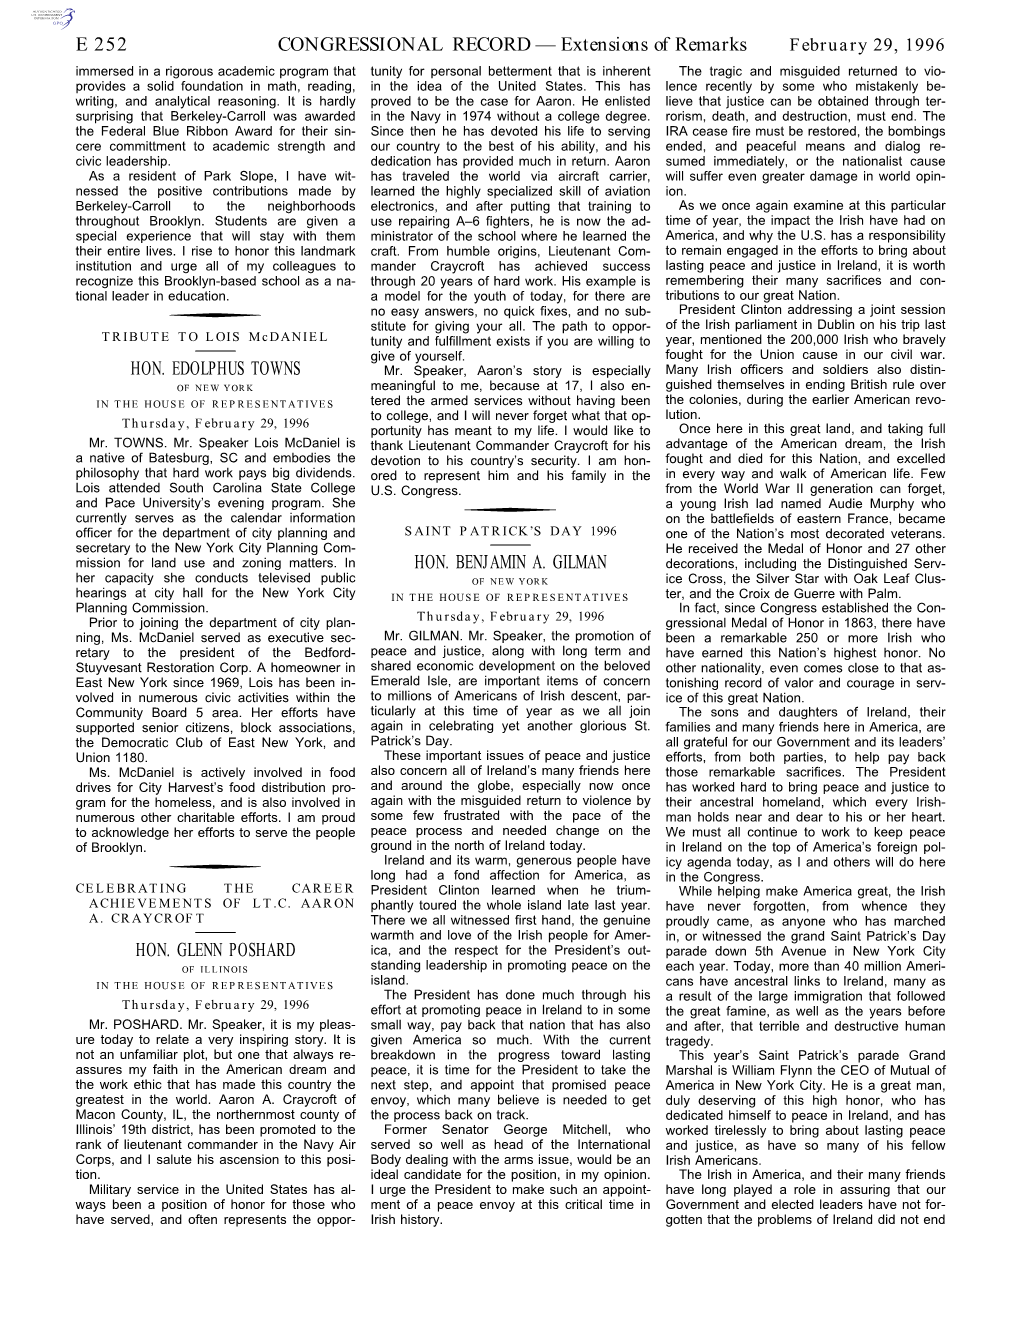 CONGRESSIONAL RECORD— Extensions of Remarks E 252 HON